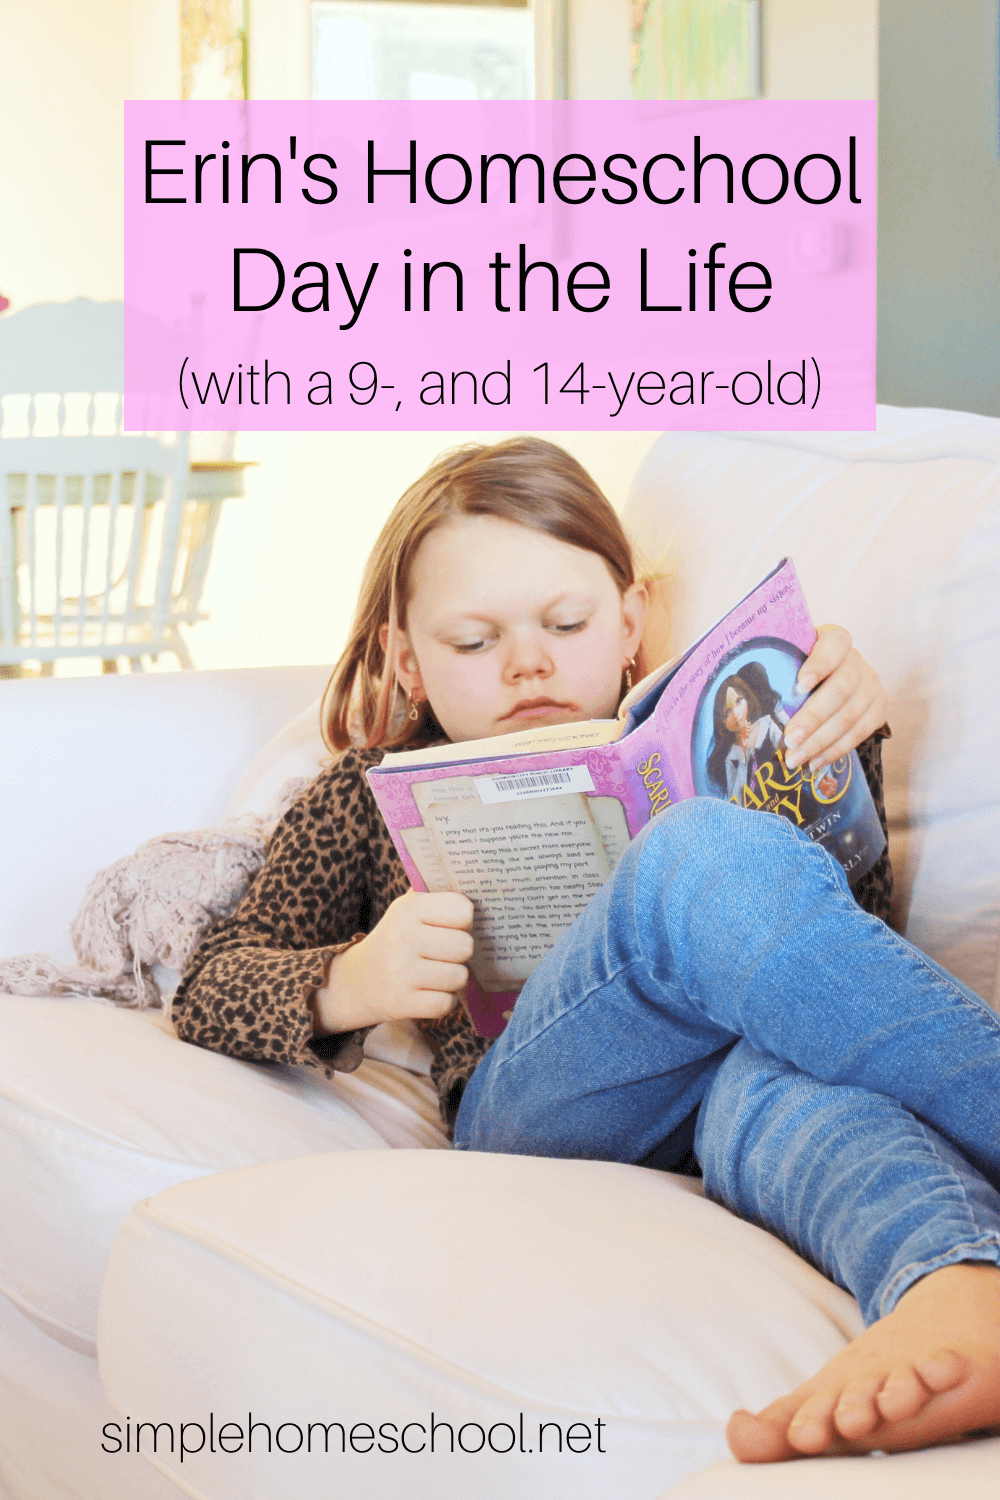 Erin's Homeschool Day in the Life (with a 9-, and 14-year-old): Come see how a single day in our homeschool looks! #homeschool #homeschooling #dayinthelife 